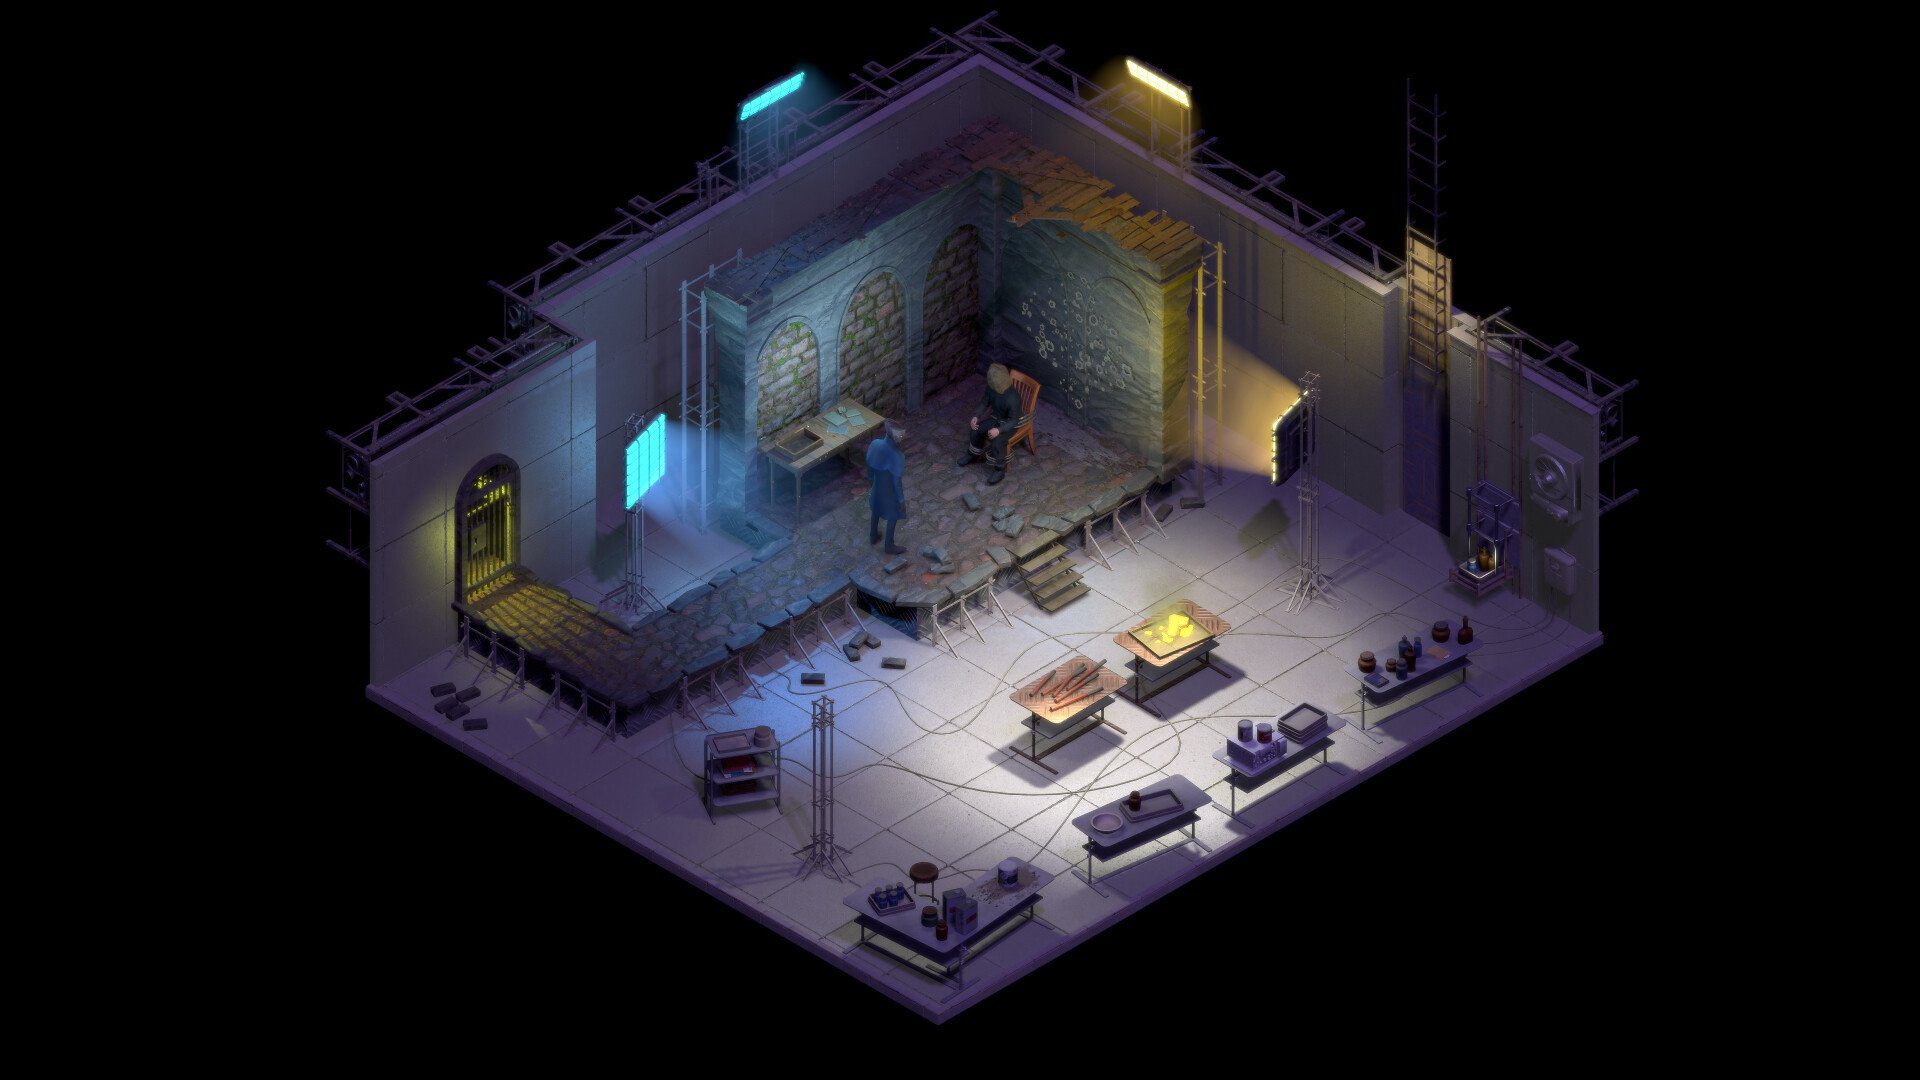 A room with a man whose head is covered surrounded by alchemic items and boxes. 